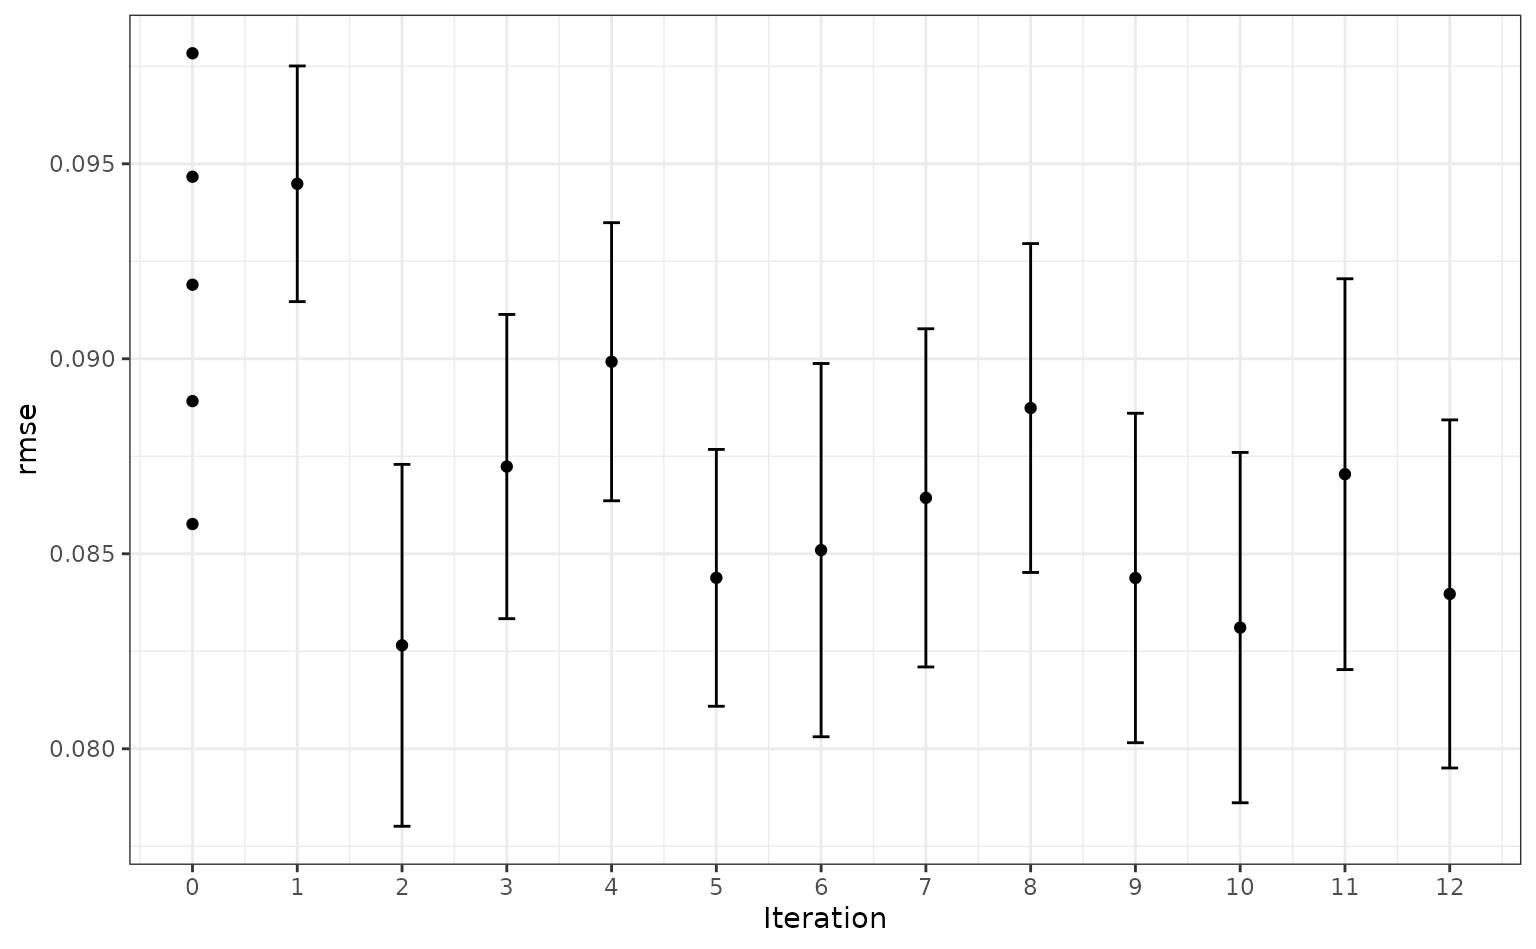 A ggplot2 dot plot. The x axis plots iterations, ranging from 0 to 20, and the y axis plots root mean squared error. After iteration 0, each point has error bars for the metric value. Generally, the error decreases as the iteration increases.